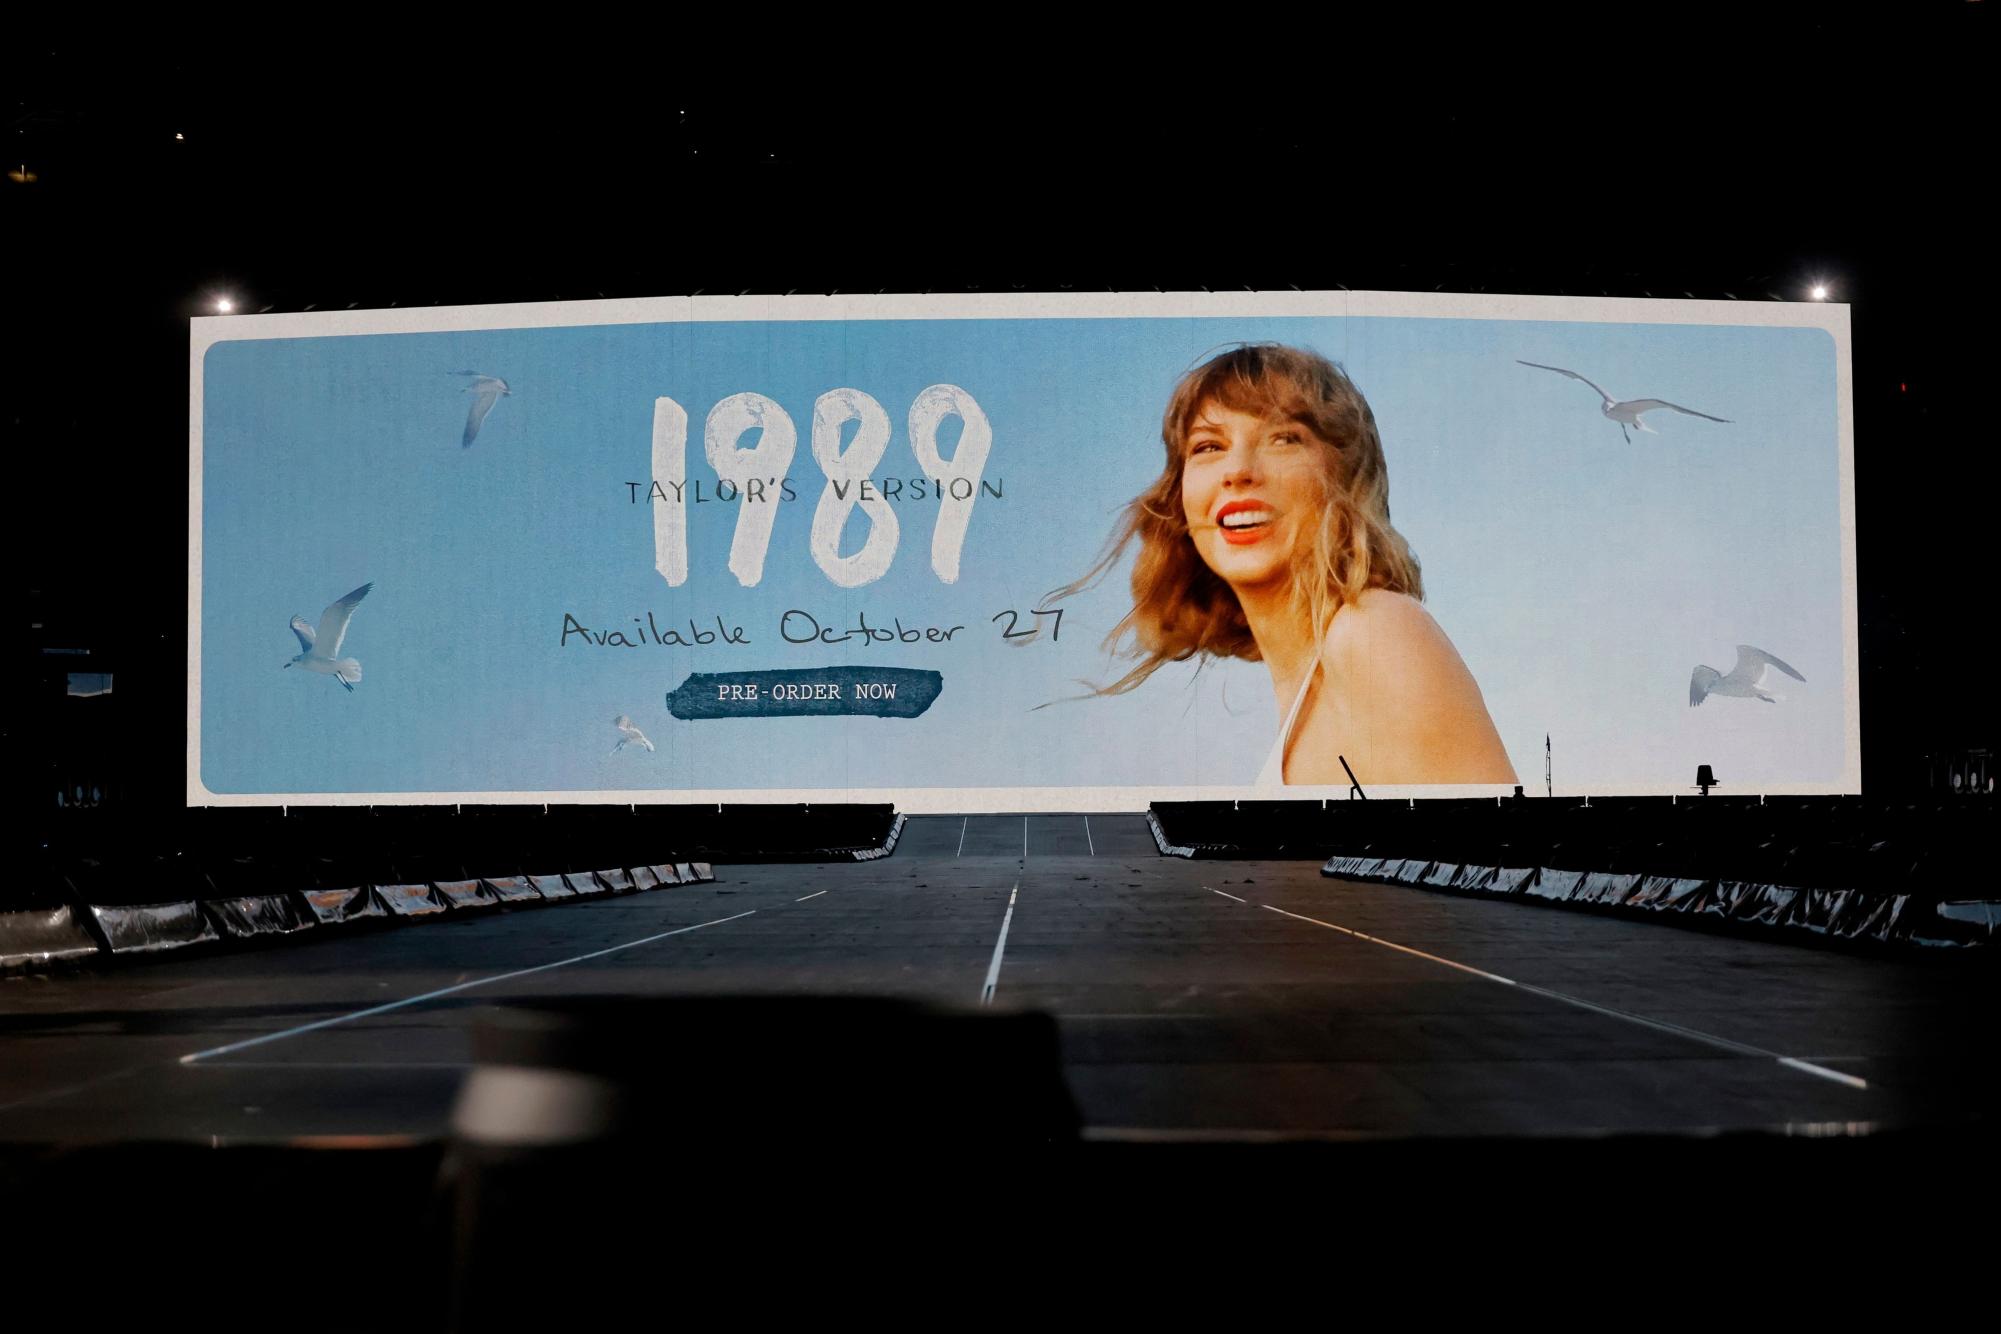 The announcement at her concert for the release of 1989 (Taylor’s Version)!